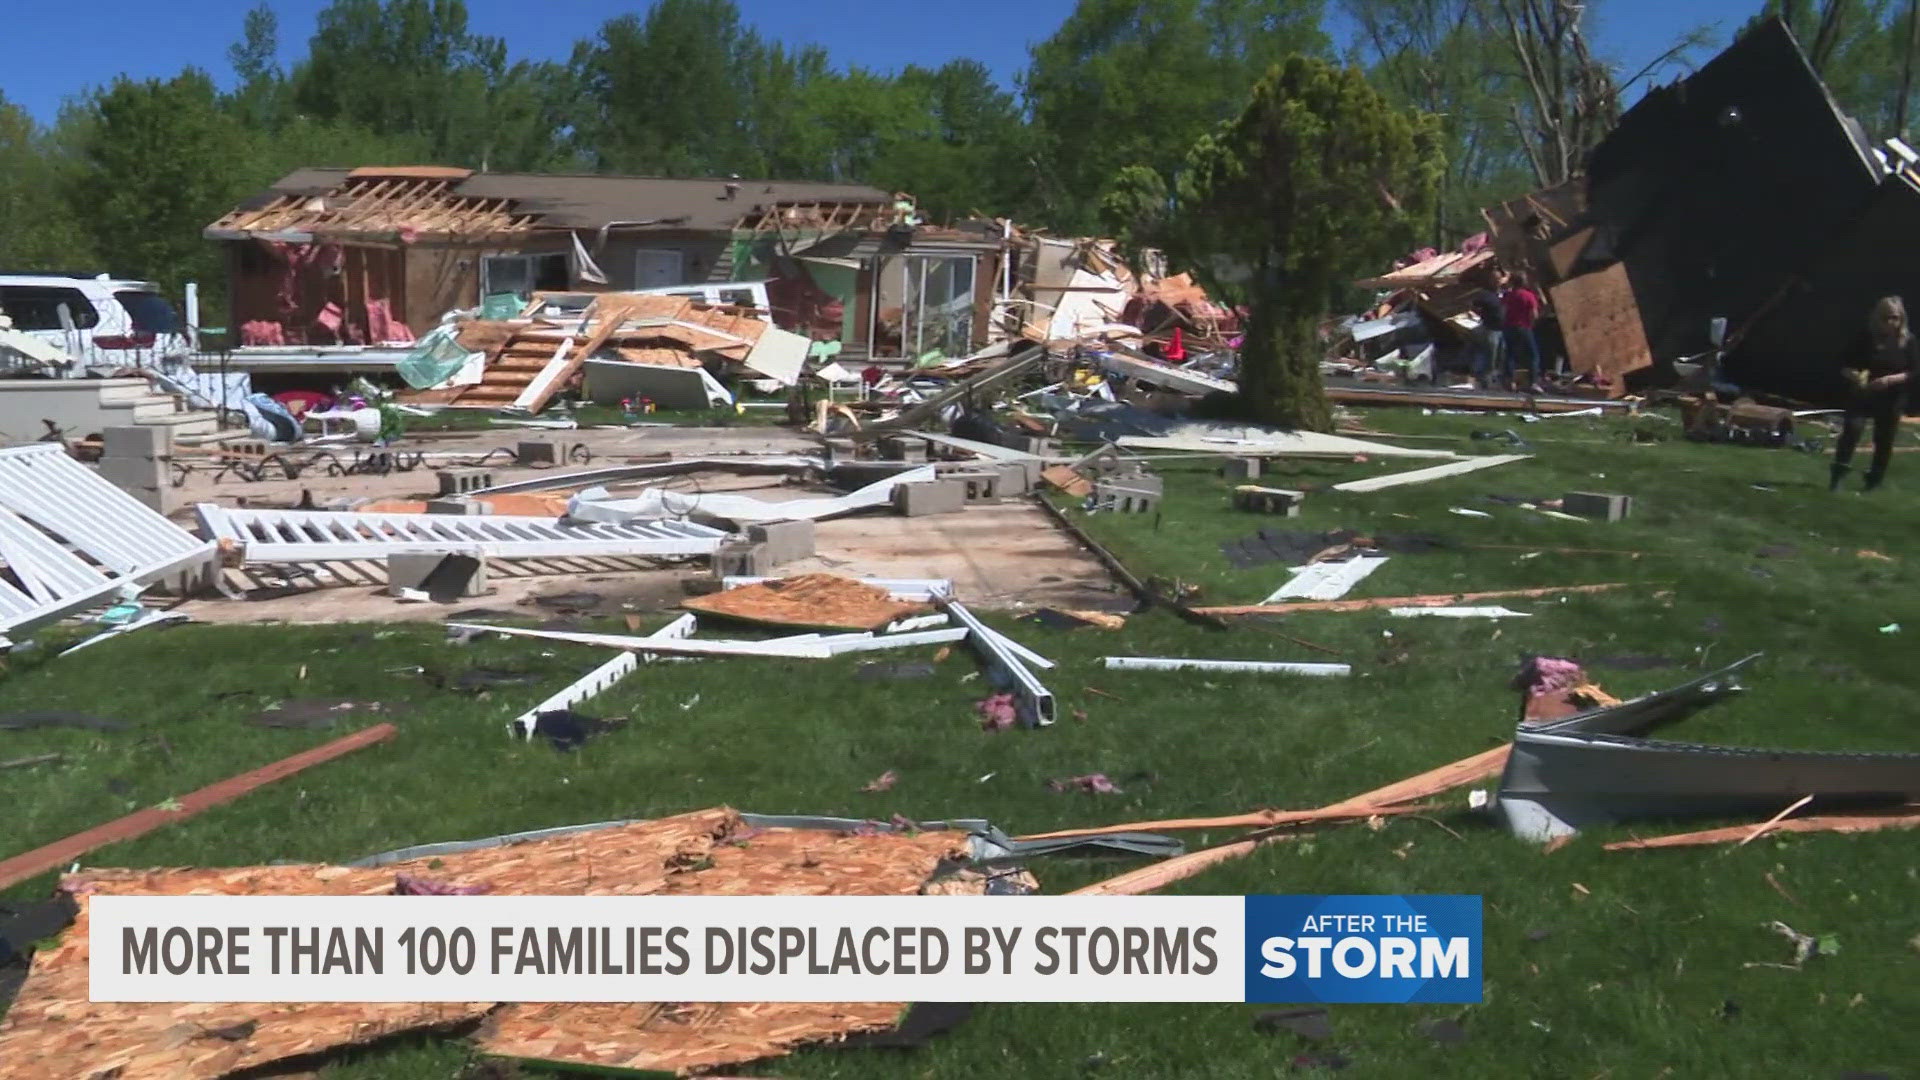 City leaders in Portage are focused on rebuilding the community after a tornado tore through it Tuesday evening.